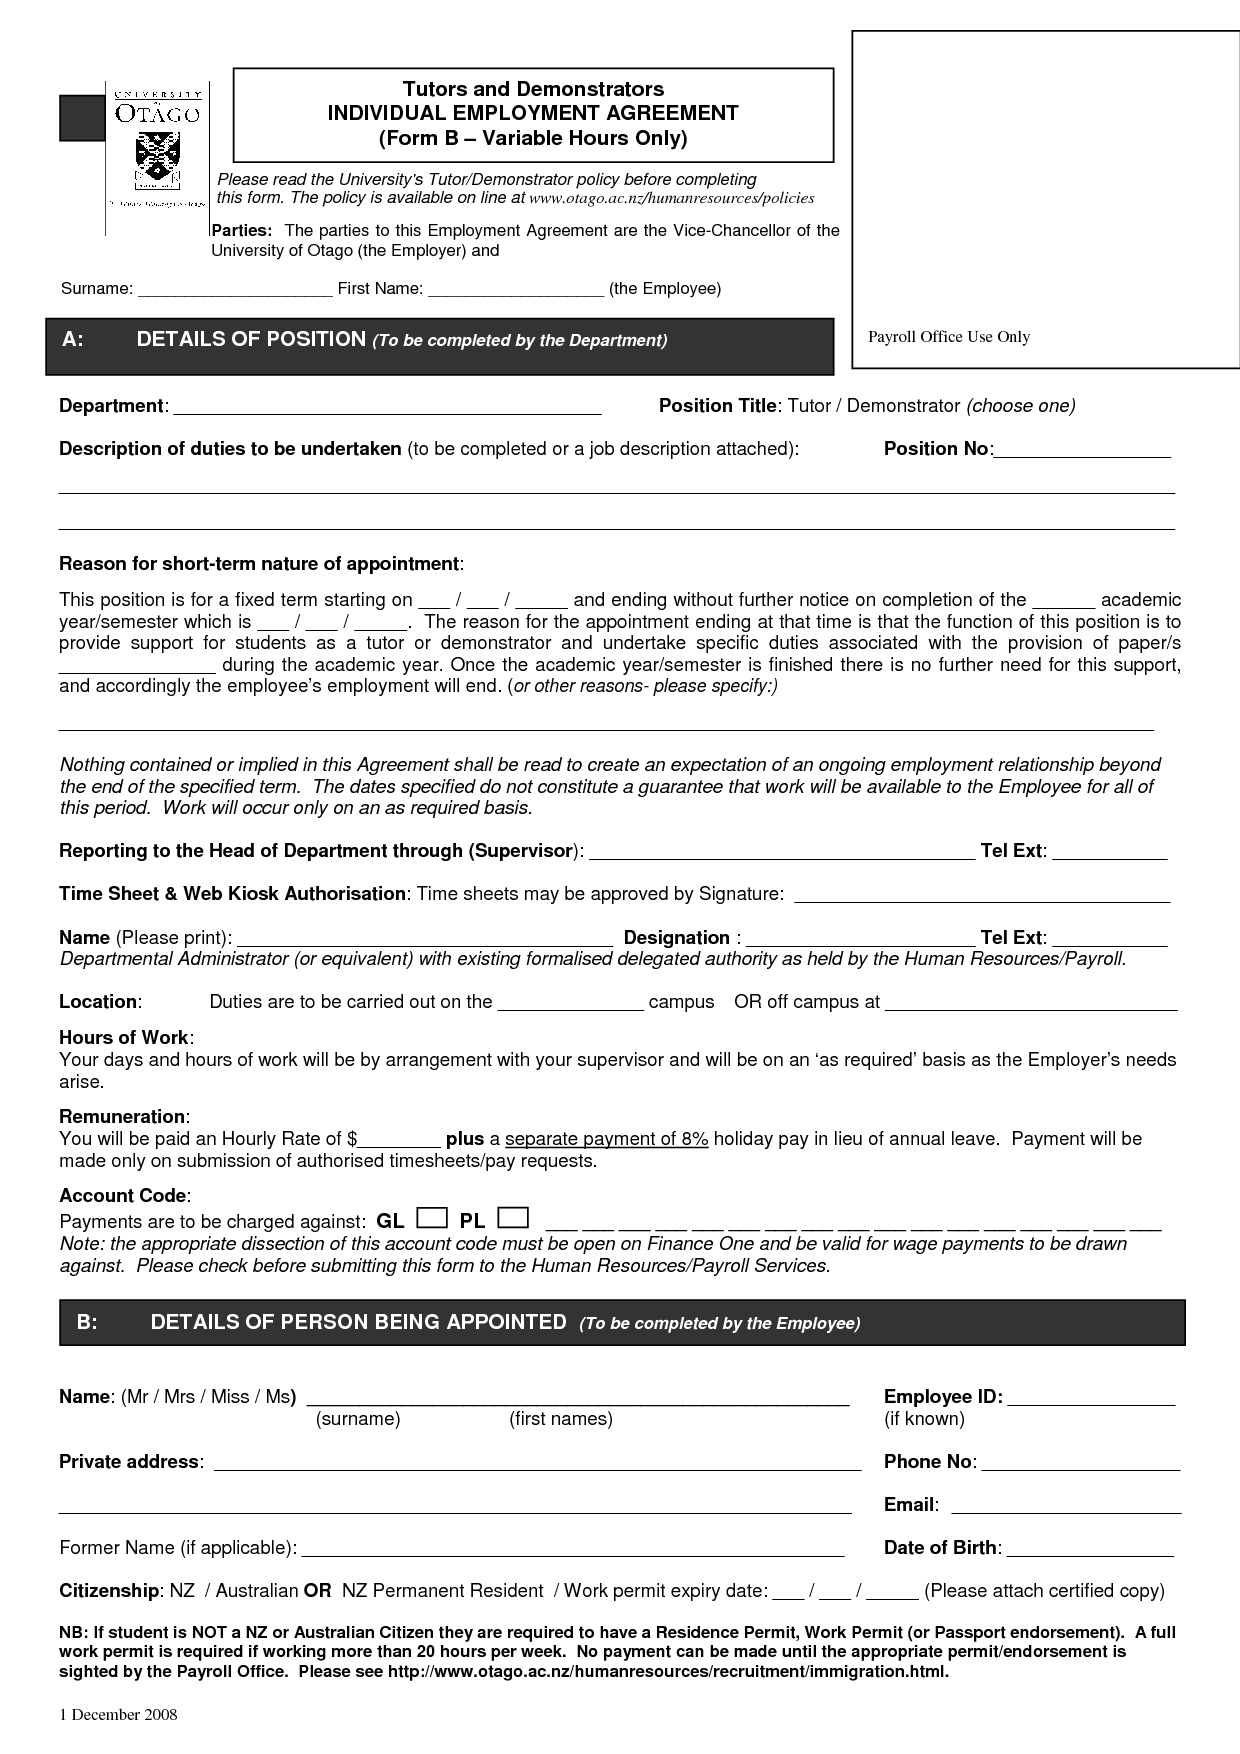 printable-contract-forms-printable-forms-free-online